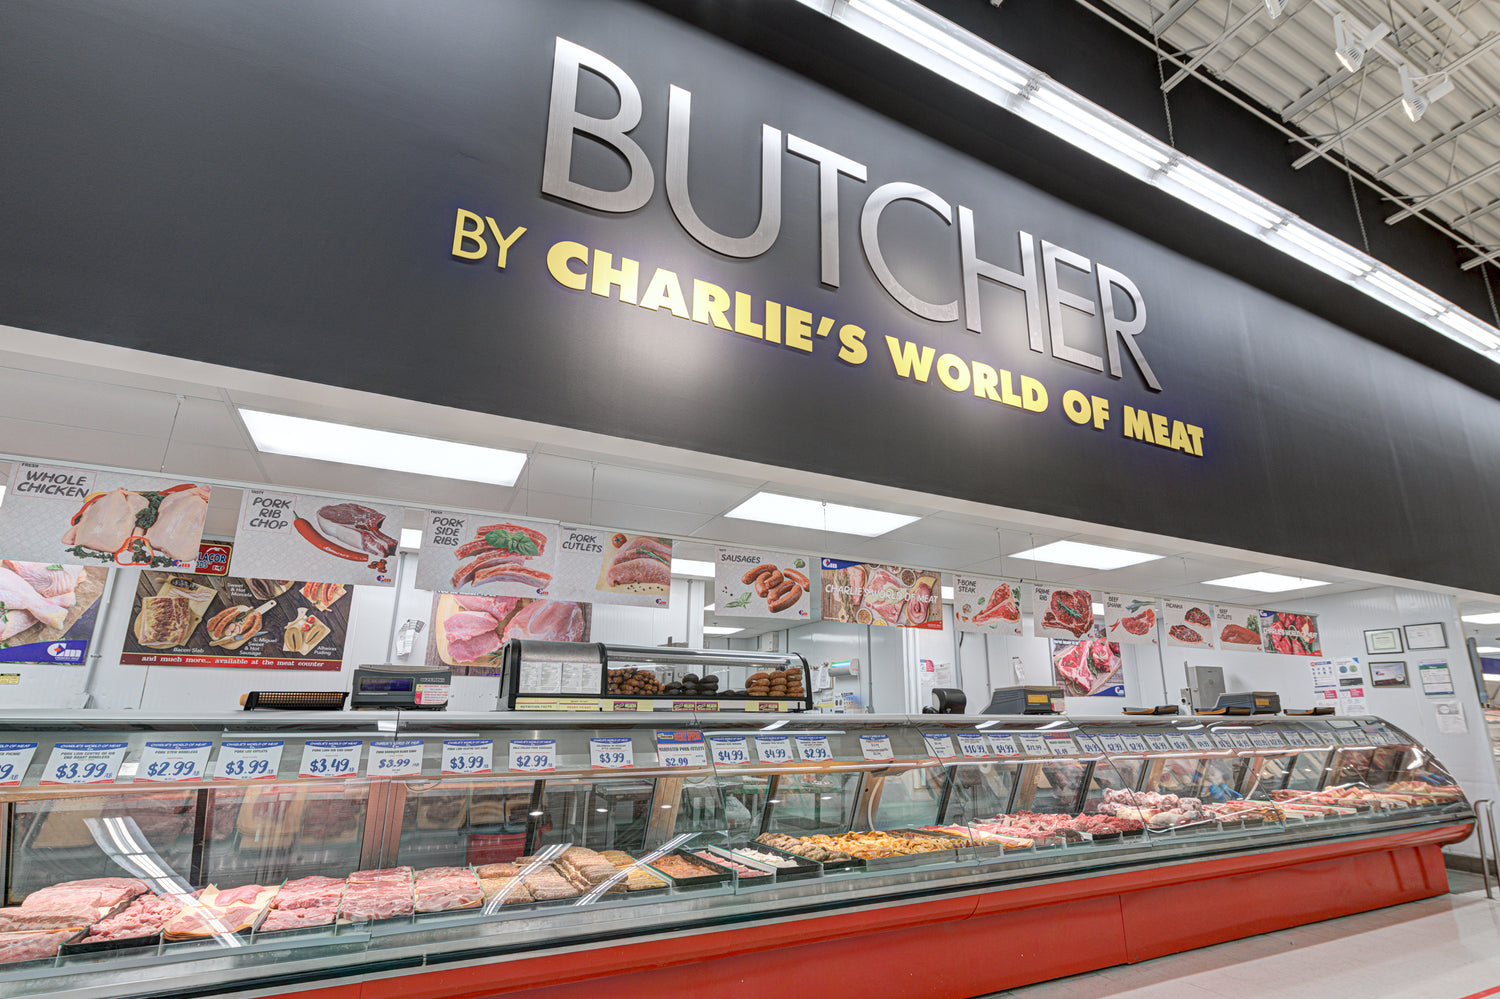 Charlie's Meat retail store - charlie's world of meat